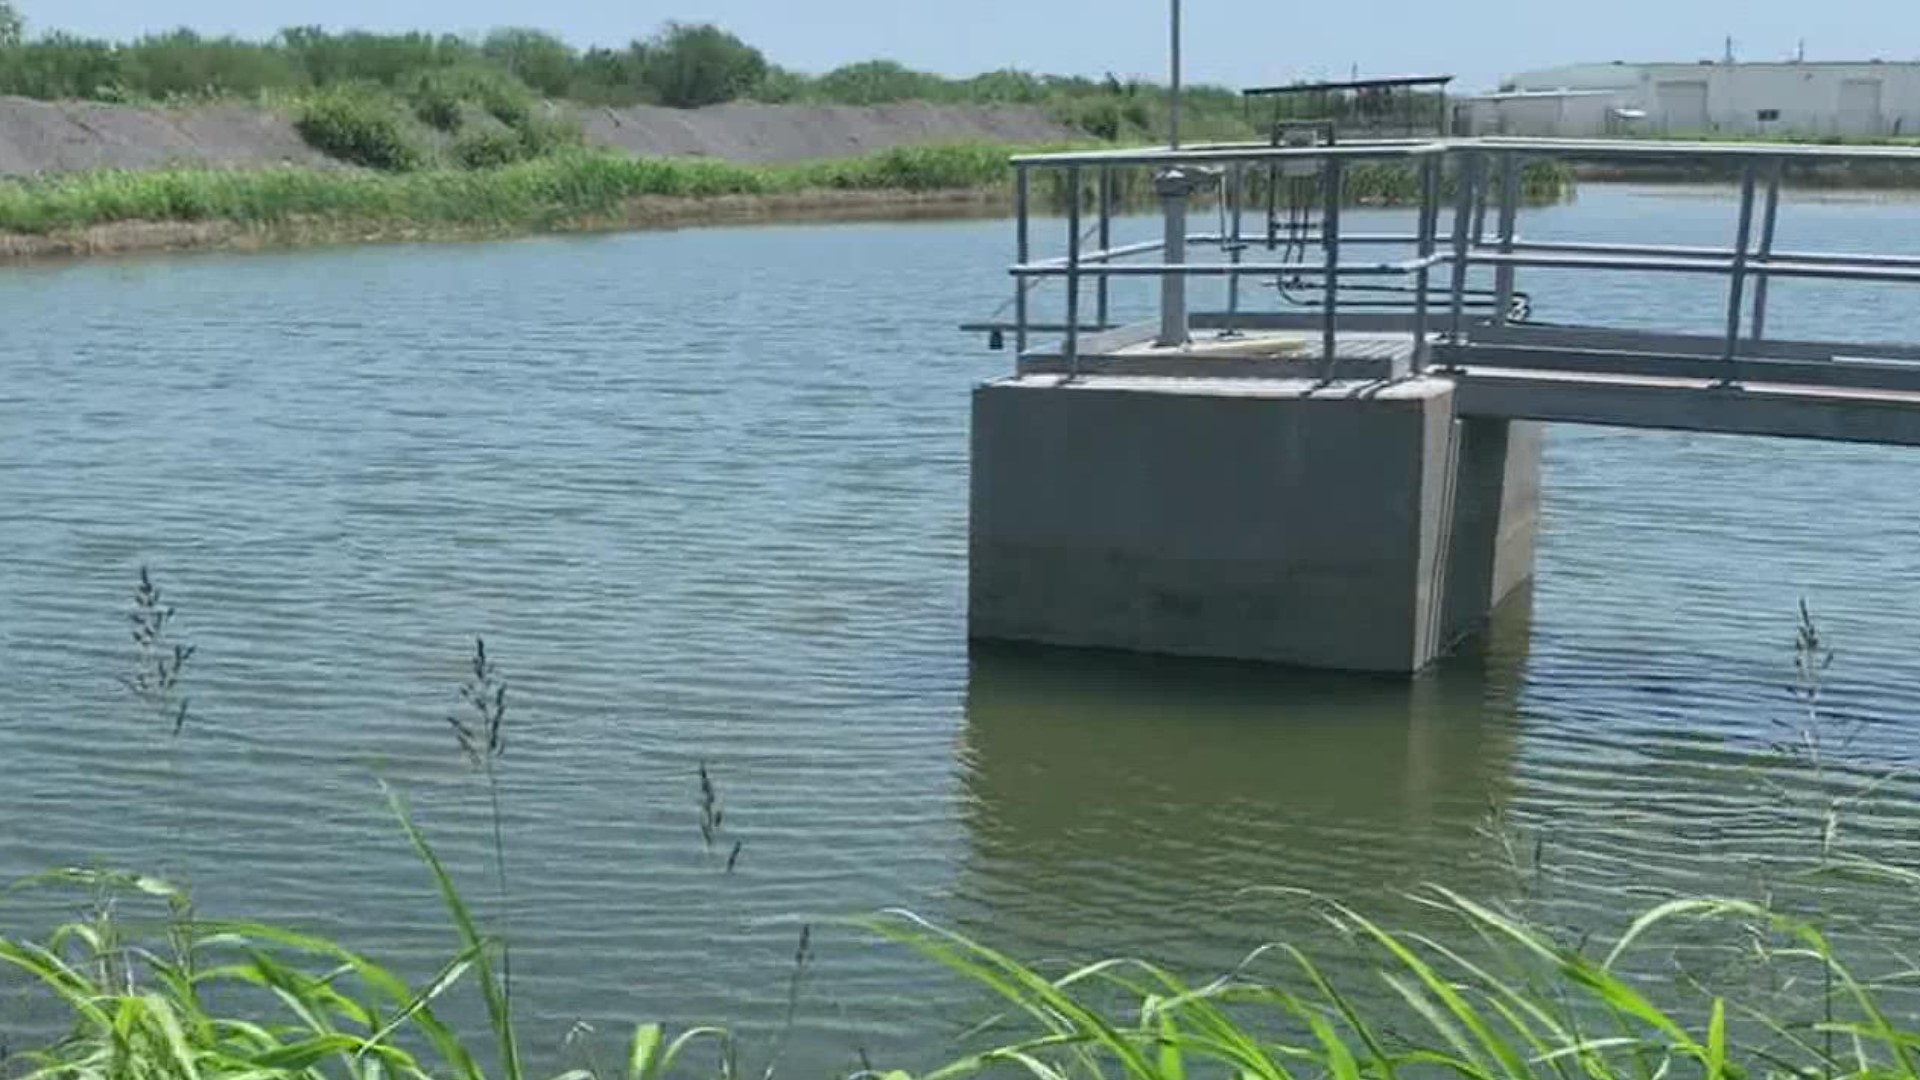 The city of Alice joined with a private company to drill for brackish water and build a reverse osmosis plant to turn that water into City drinking water.